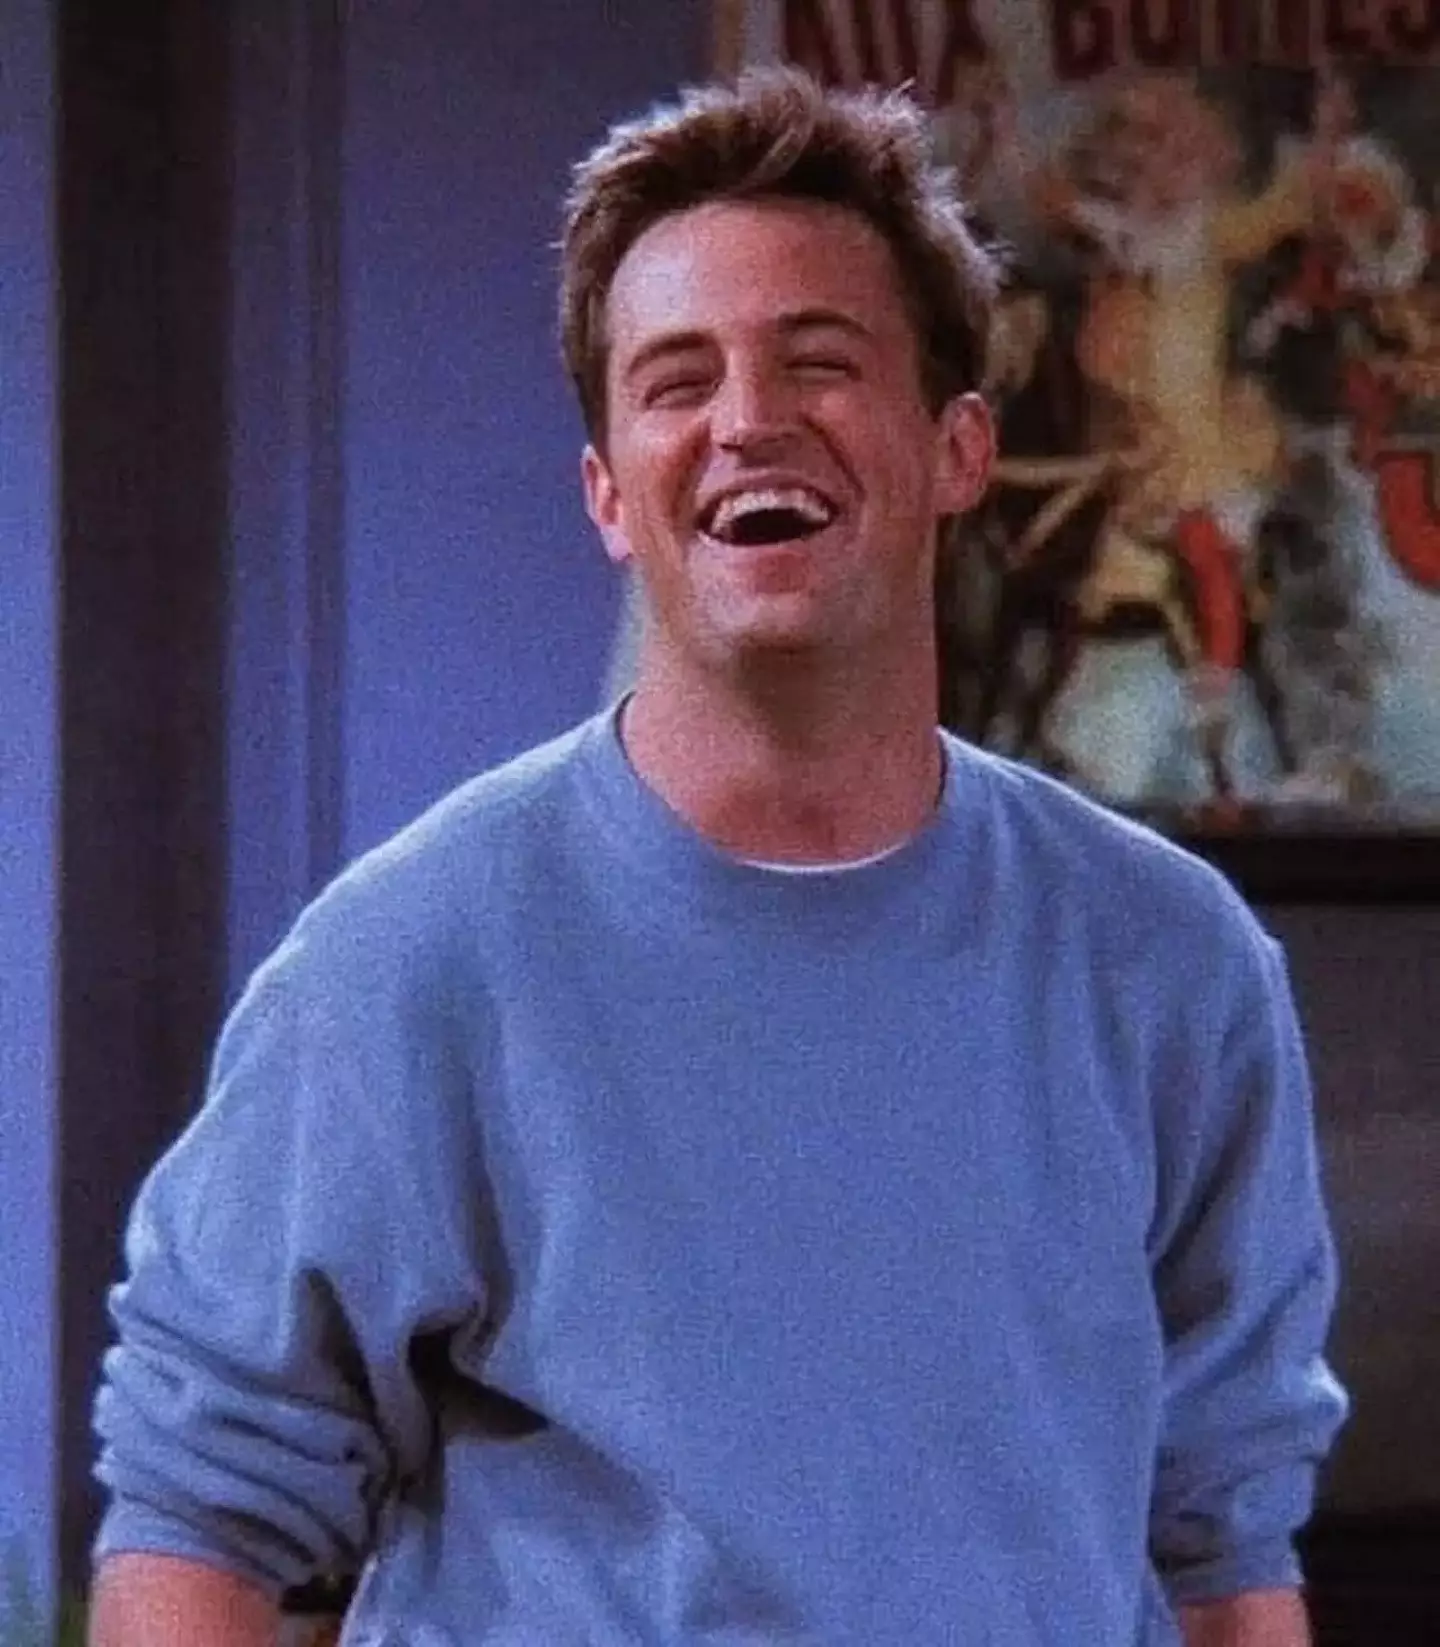 Matthew Perry starred in Friends for 10 years.